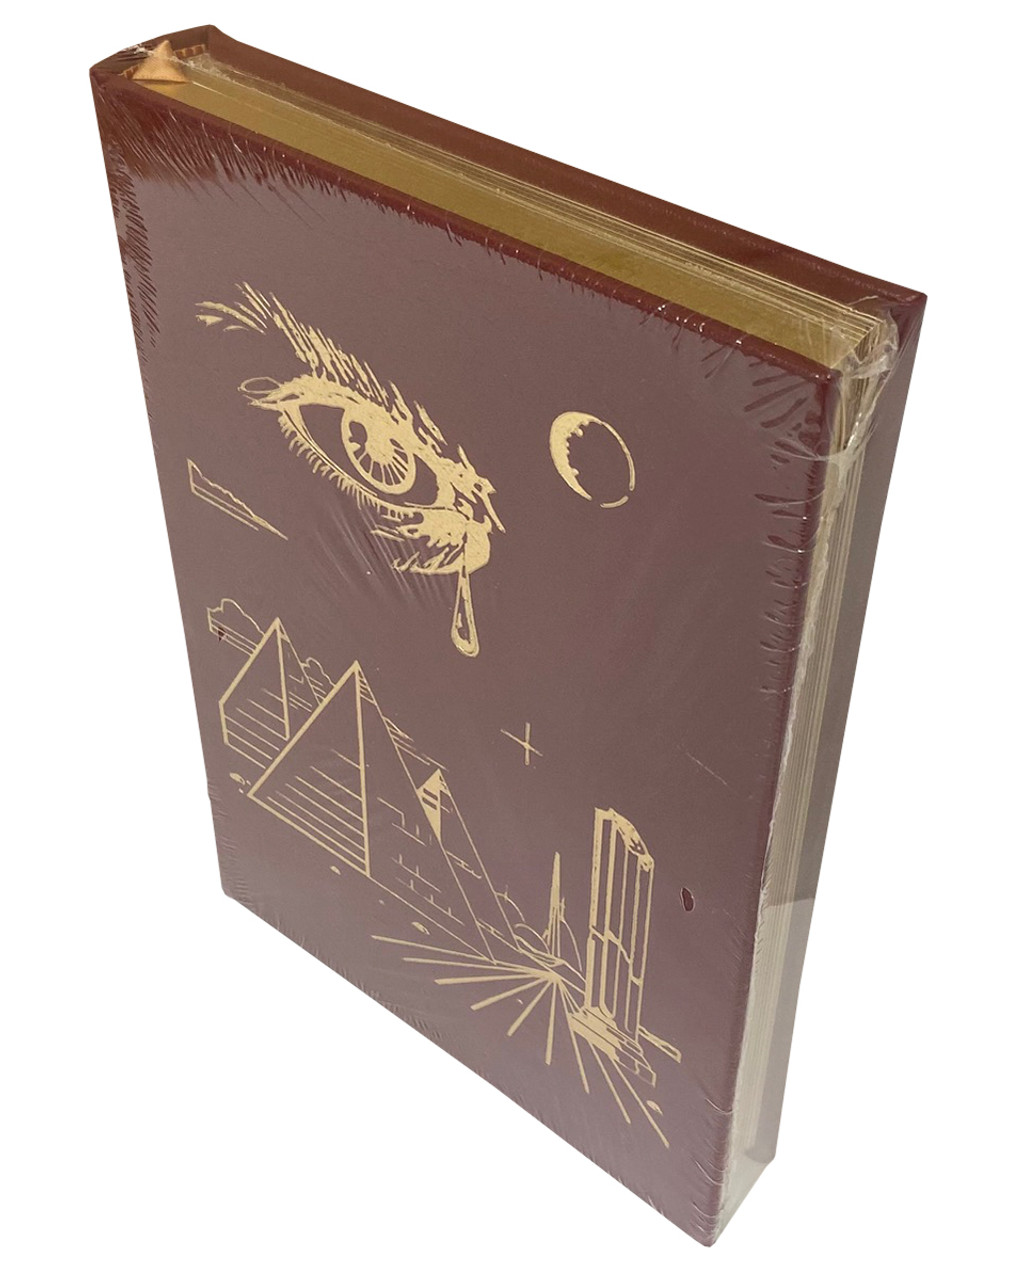 Roger Zelazny "This Immortal" Limited Edition, Leather Bound Collector's Edition [Sealed]